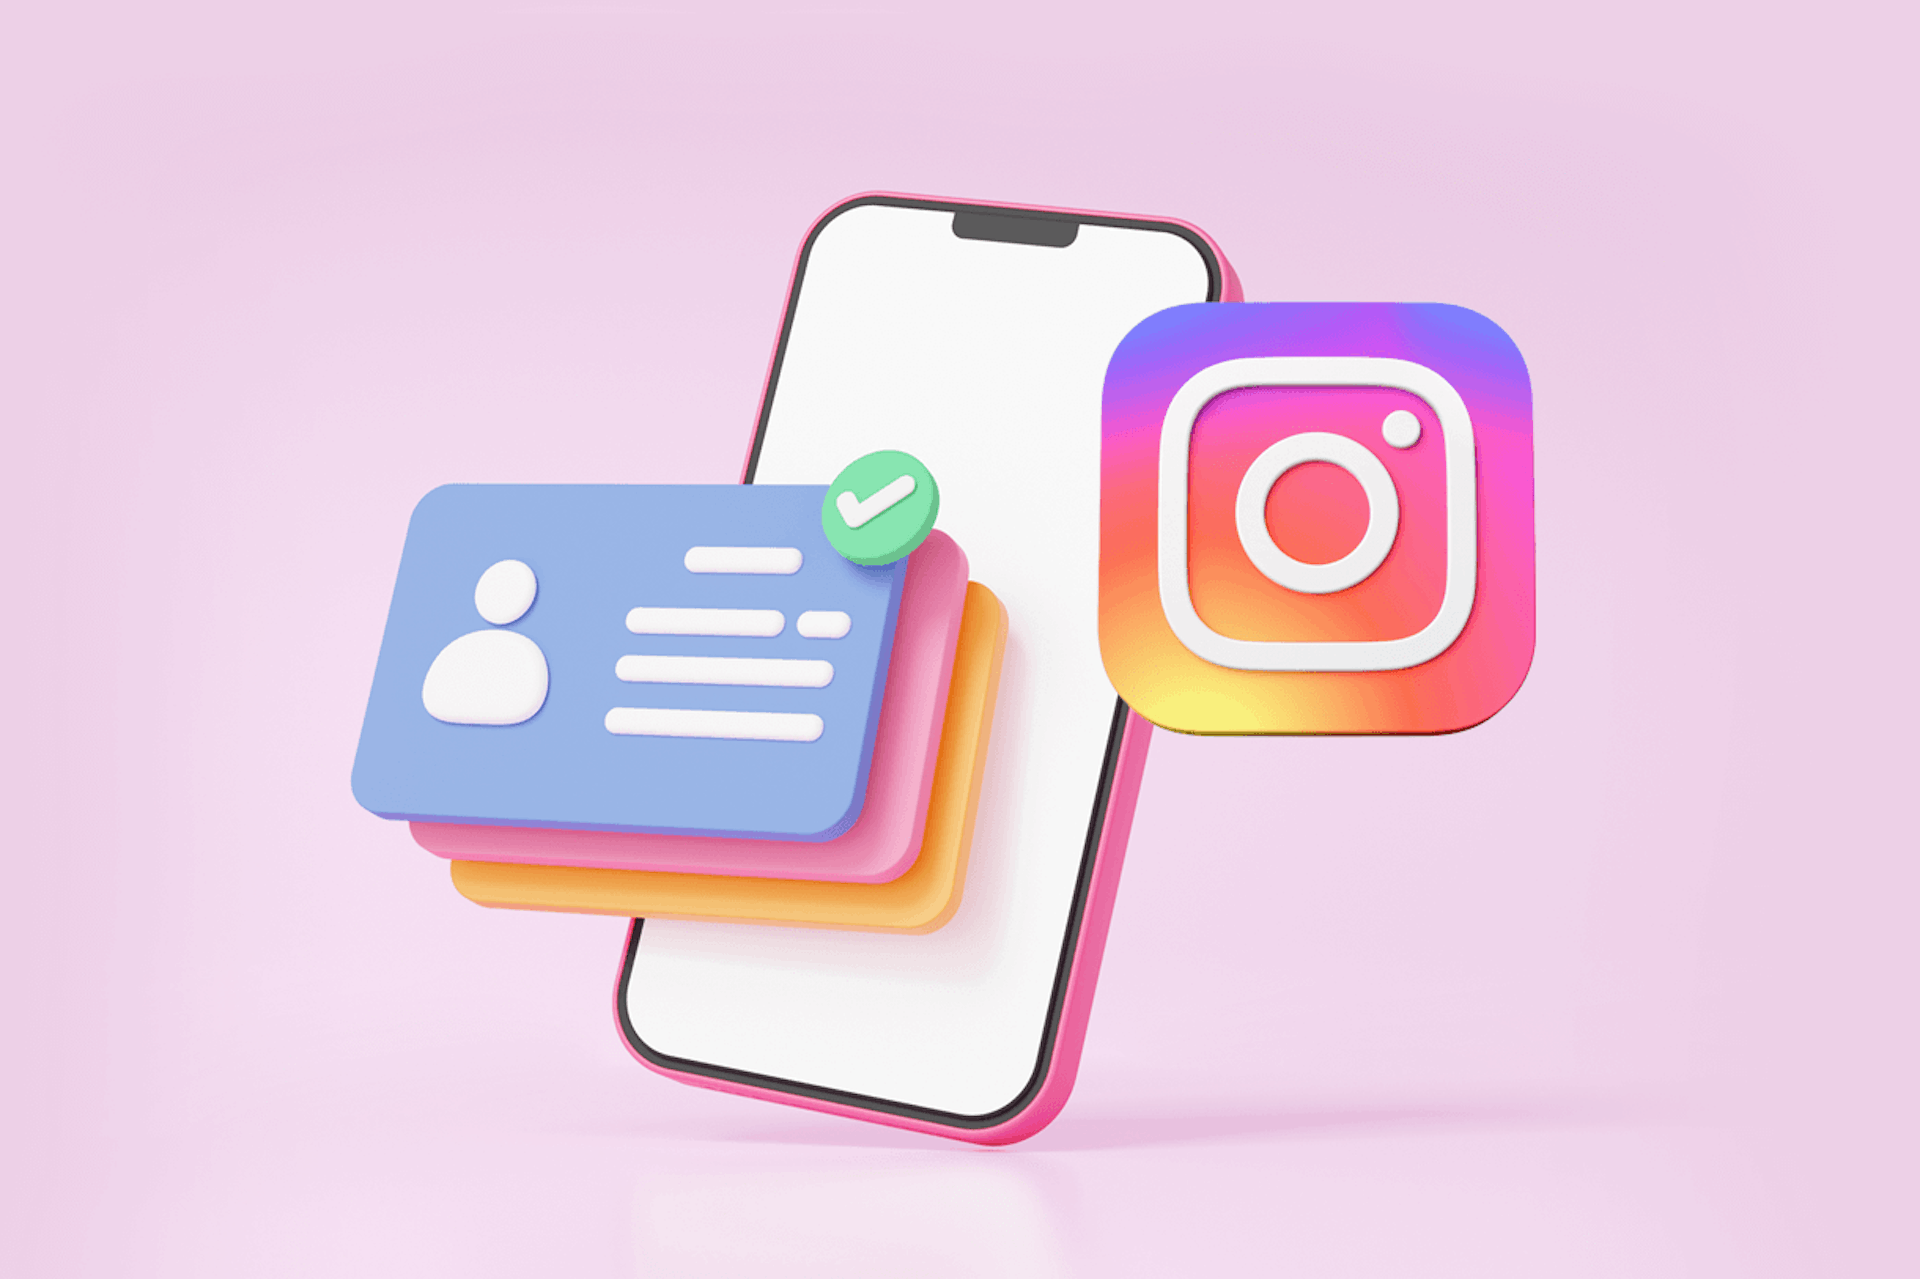 3D illustration of a smartphone, an Instagram icon, and influencer profiles for our blog on how to perform an Instagram influencer audit